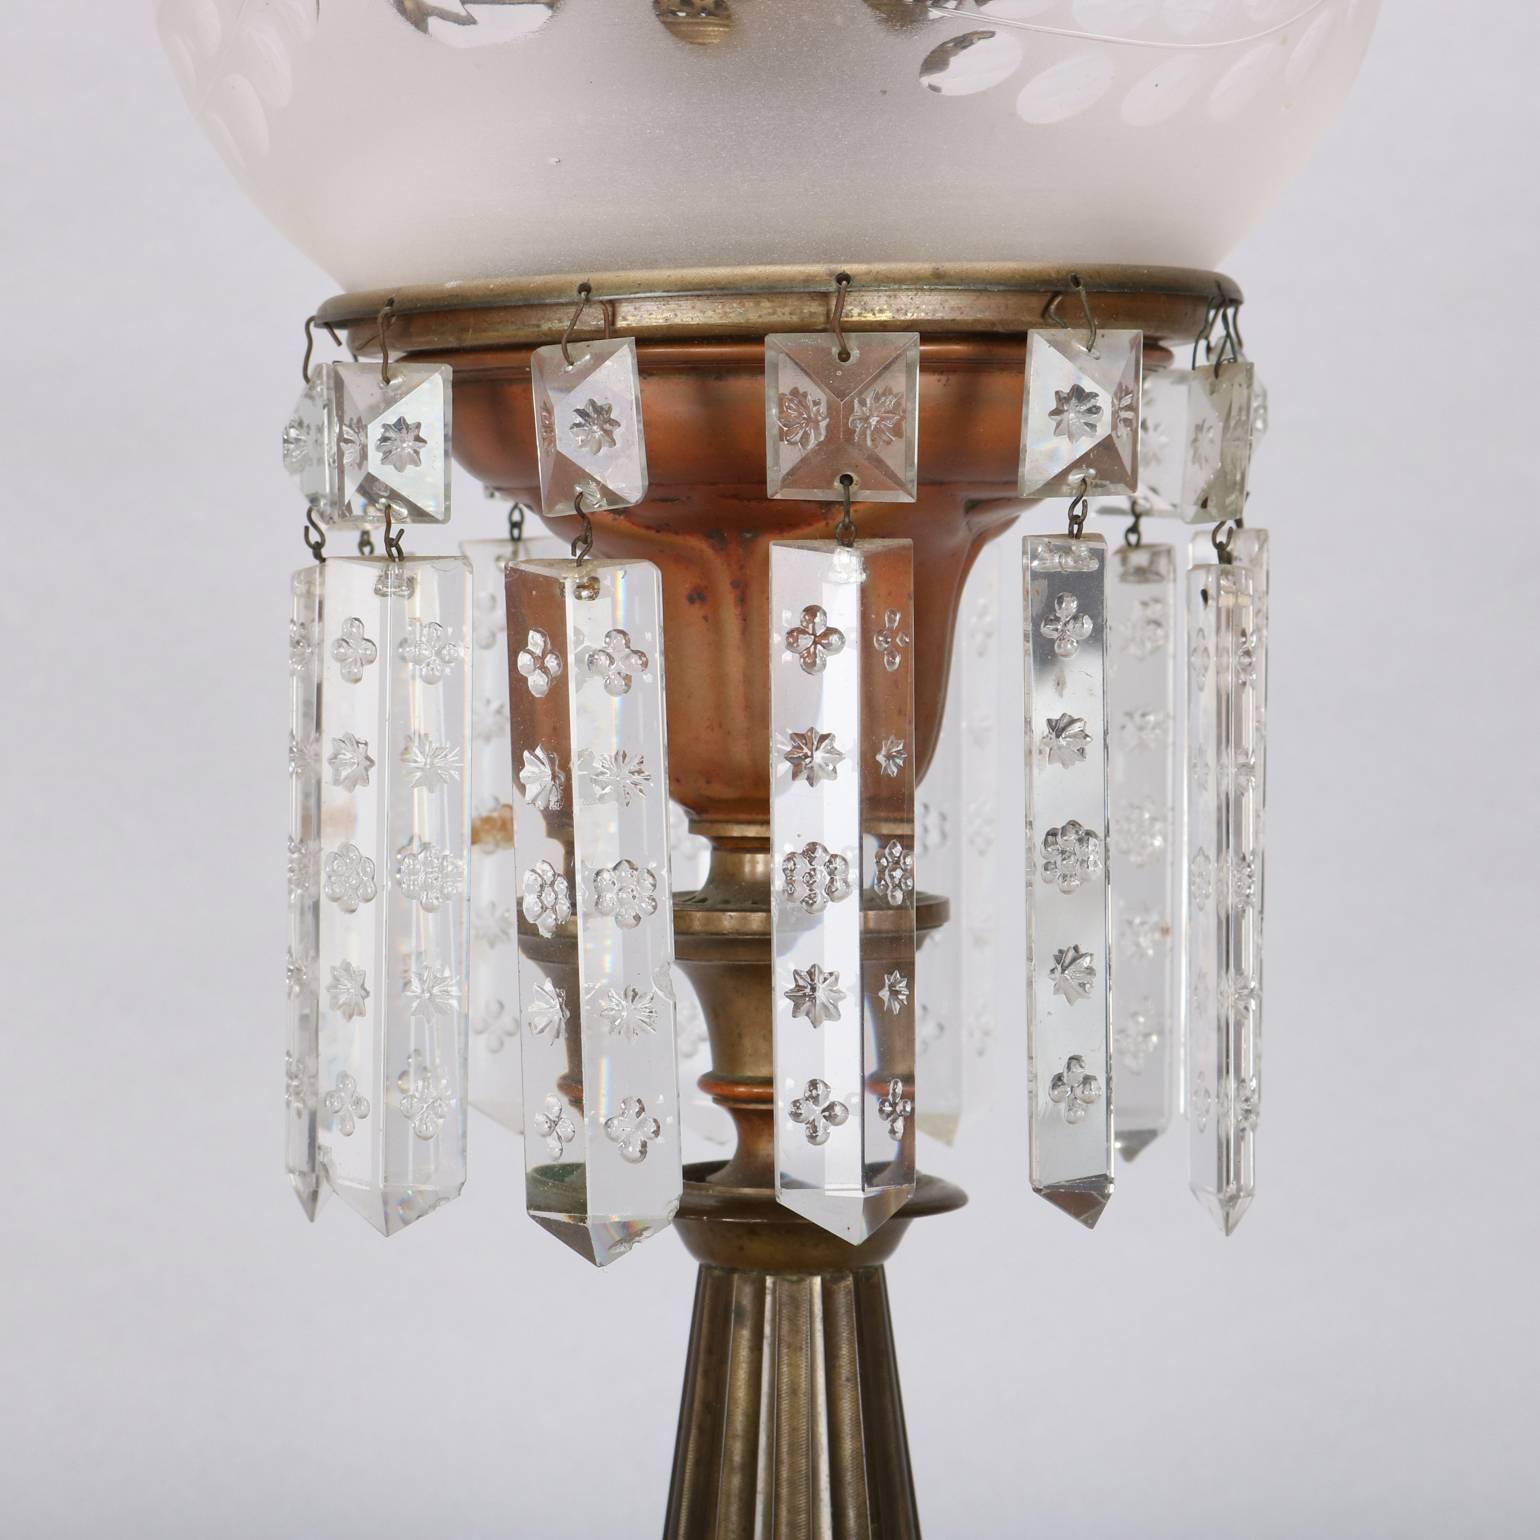 19th Century Antique Brass, Crystal & Marble Electrified Solar Table Lamp, The Arctic MB Co.